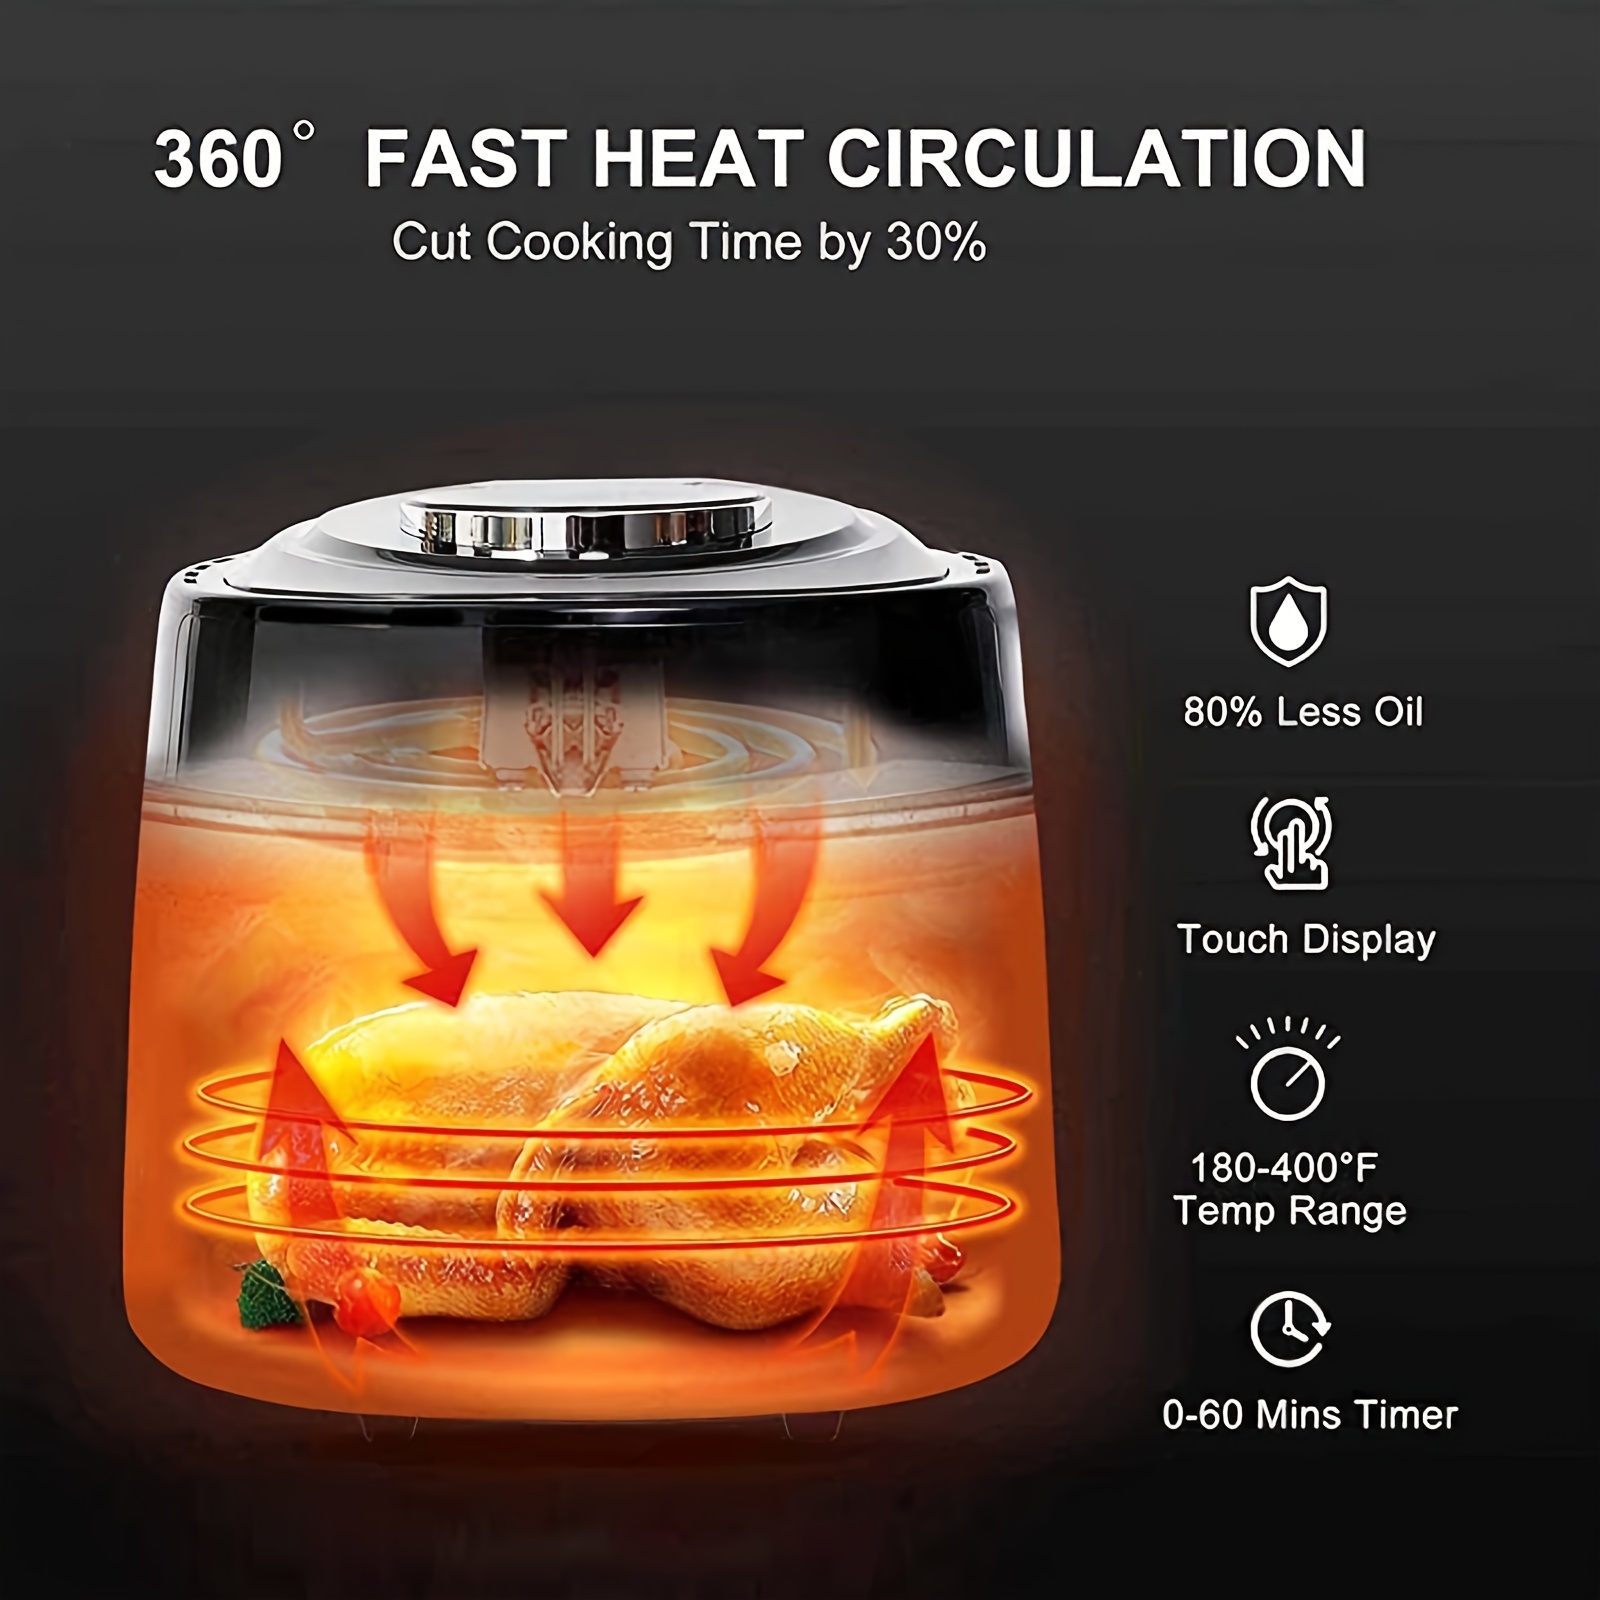 5qt 5.5qt Digital Air Fryer Transparent Cooking Window Fryer Air Fryer Led  Touch Screen Adjustable Temperature (5.5qt Visible Window) Air Fryer With  Knob Design Comes With 2 Silicone Baking Pans Cookware, Kitchenware